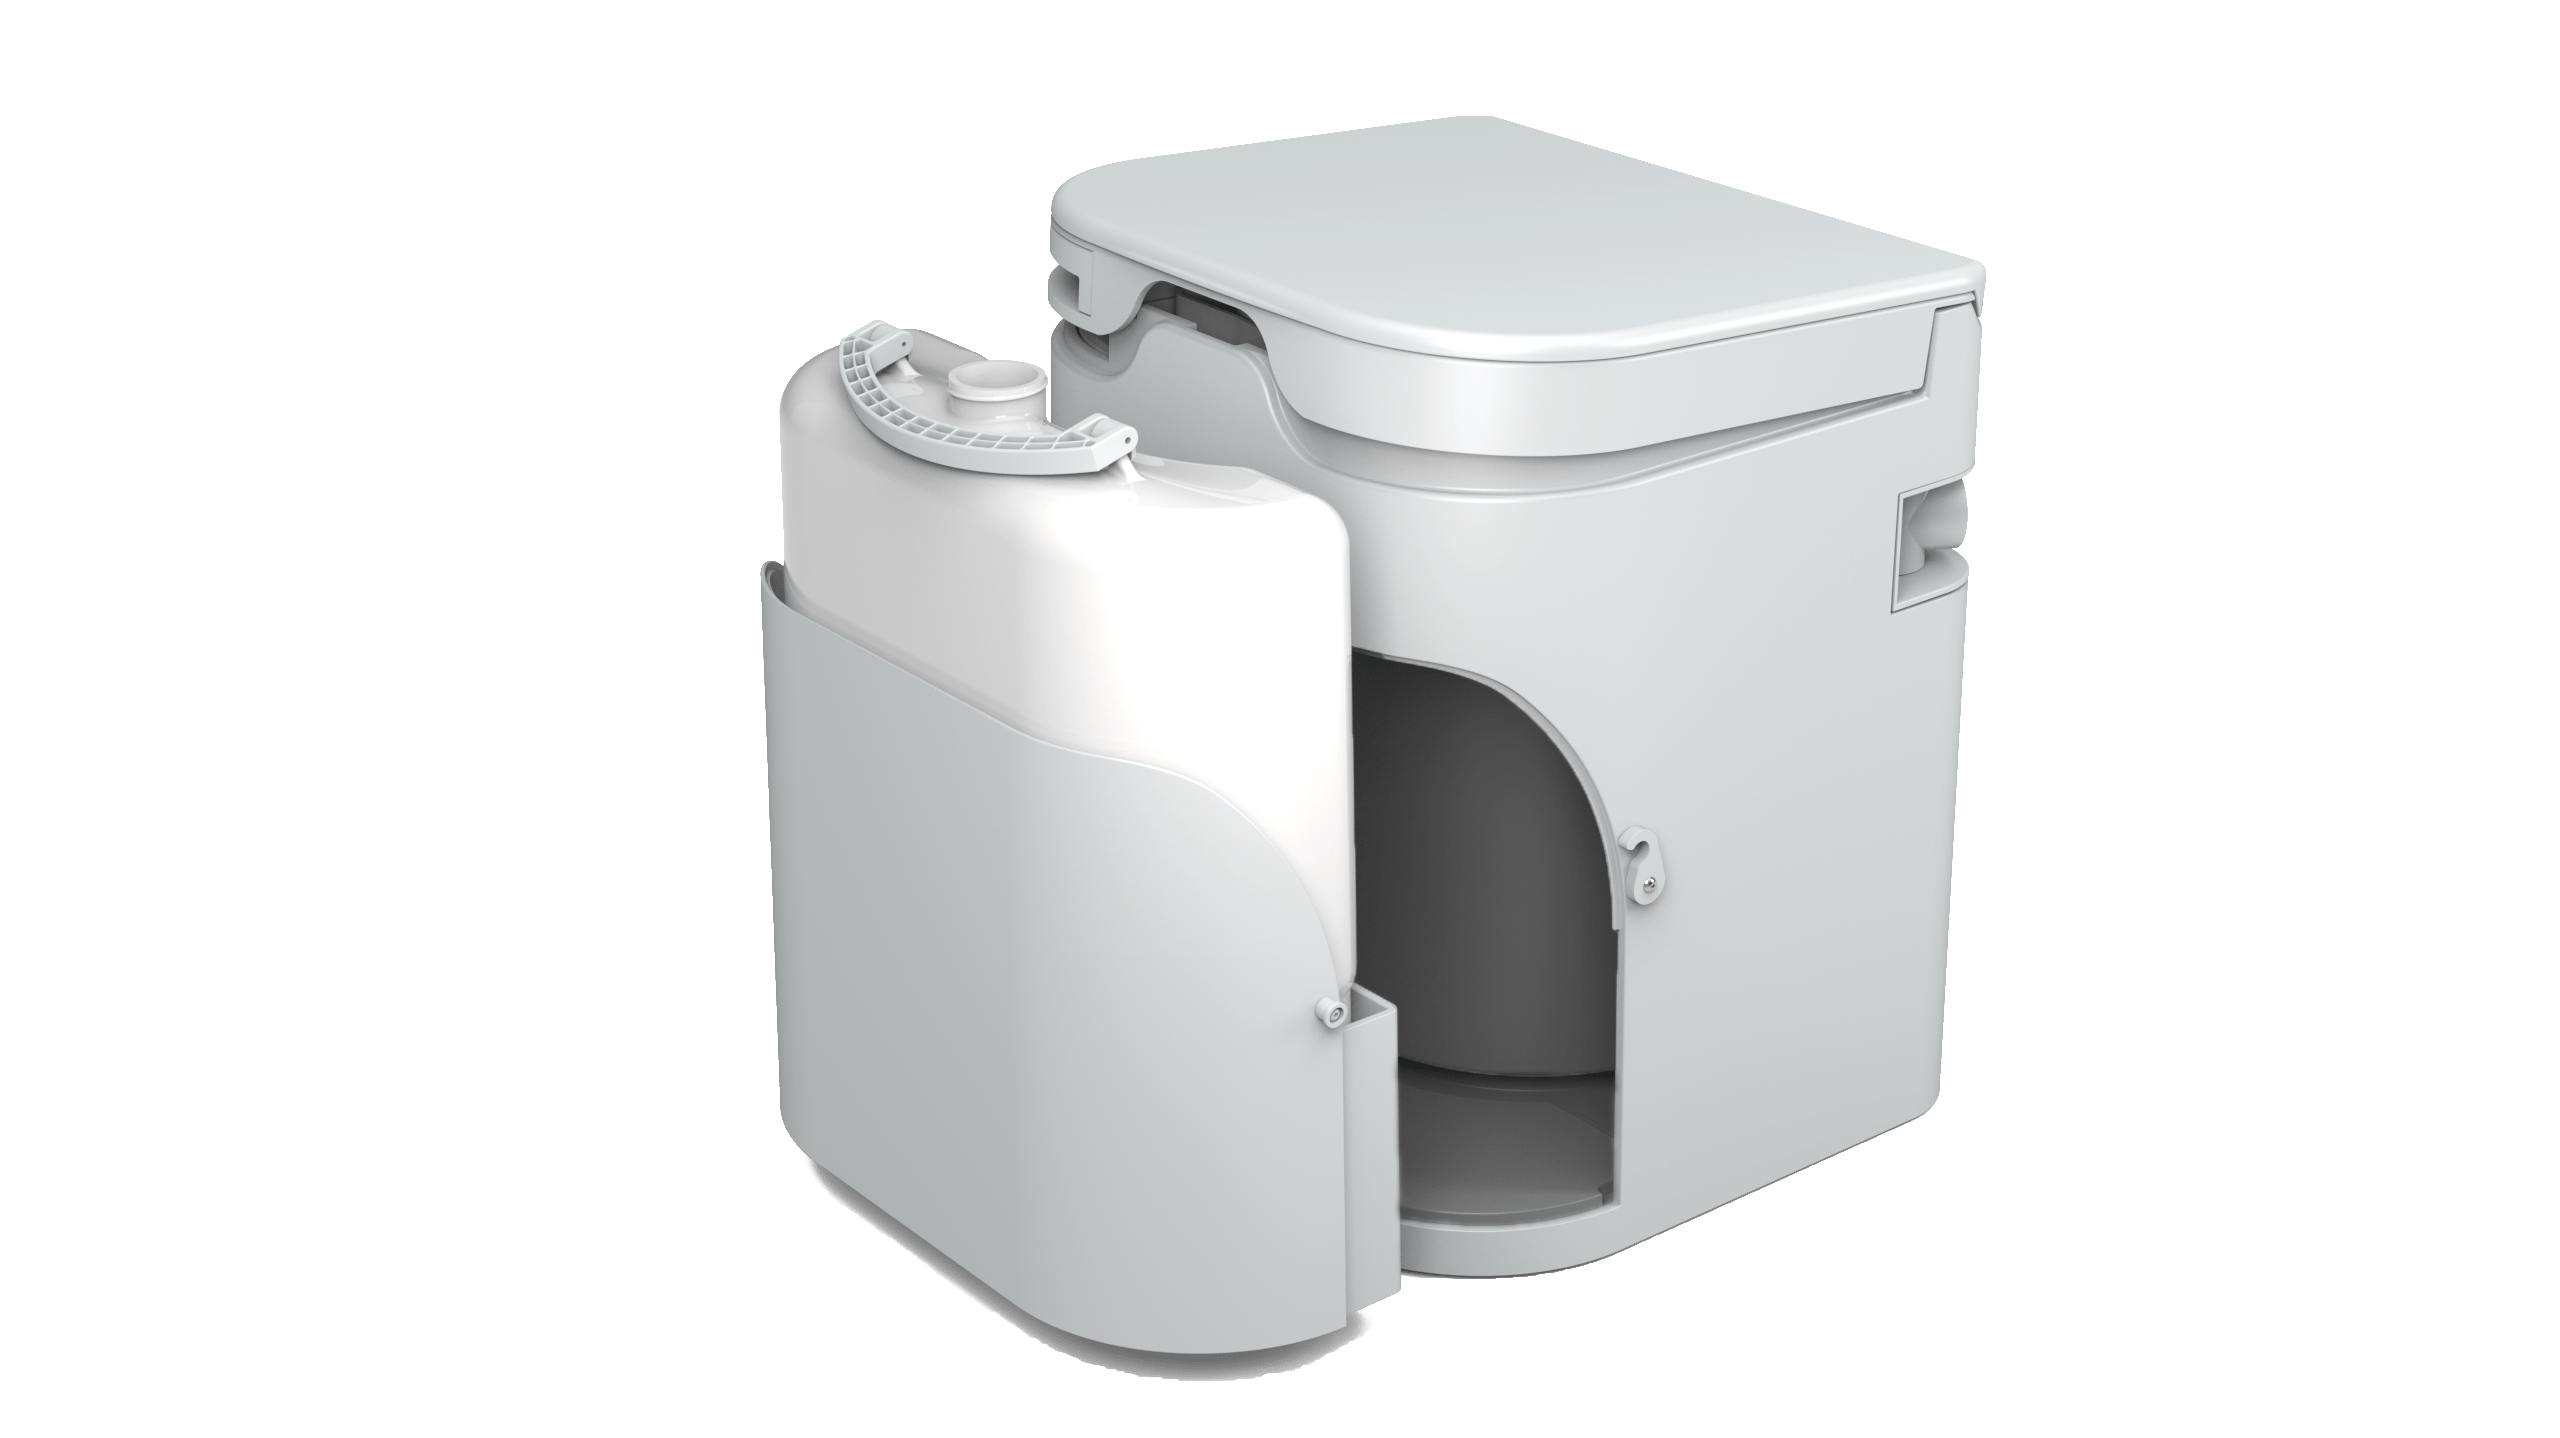 OGO Waterless Compost Toilet - Inside View